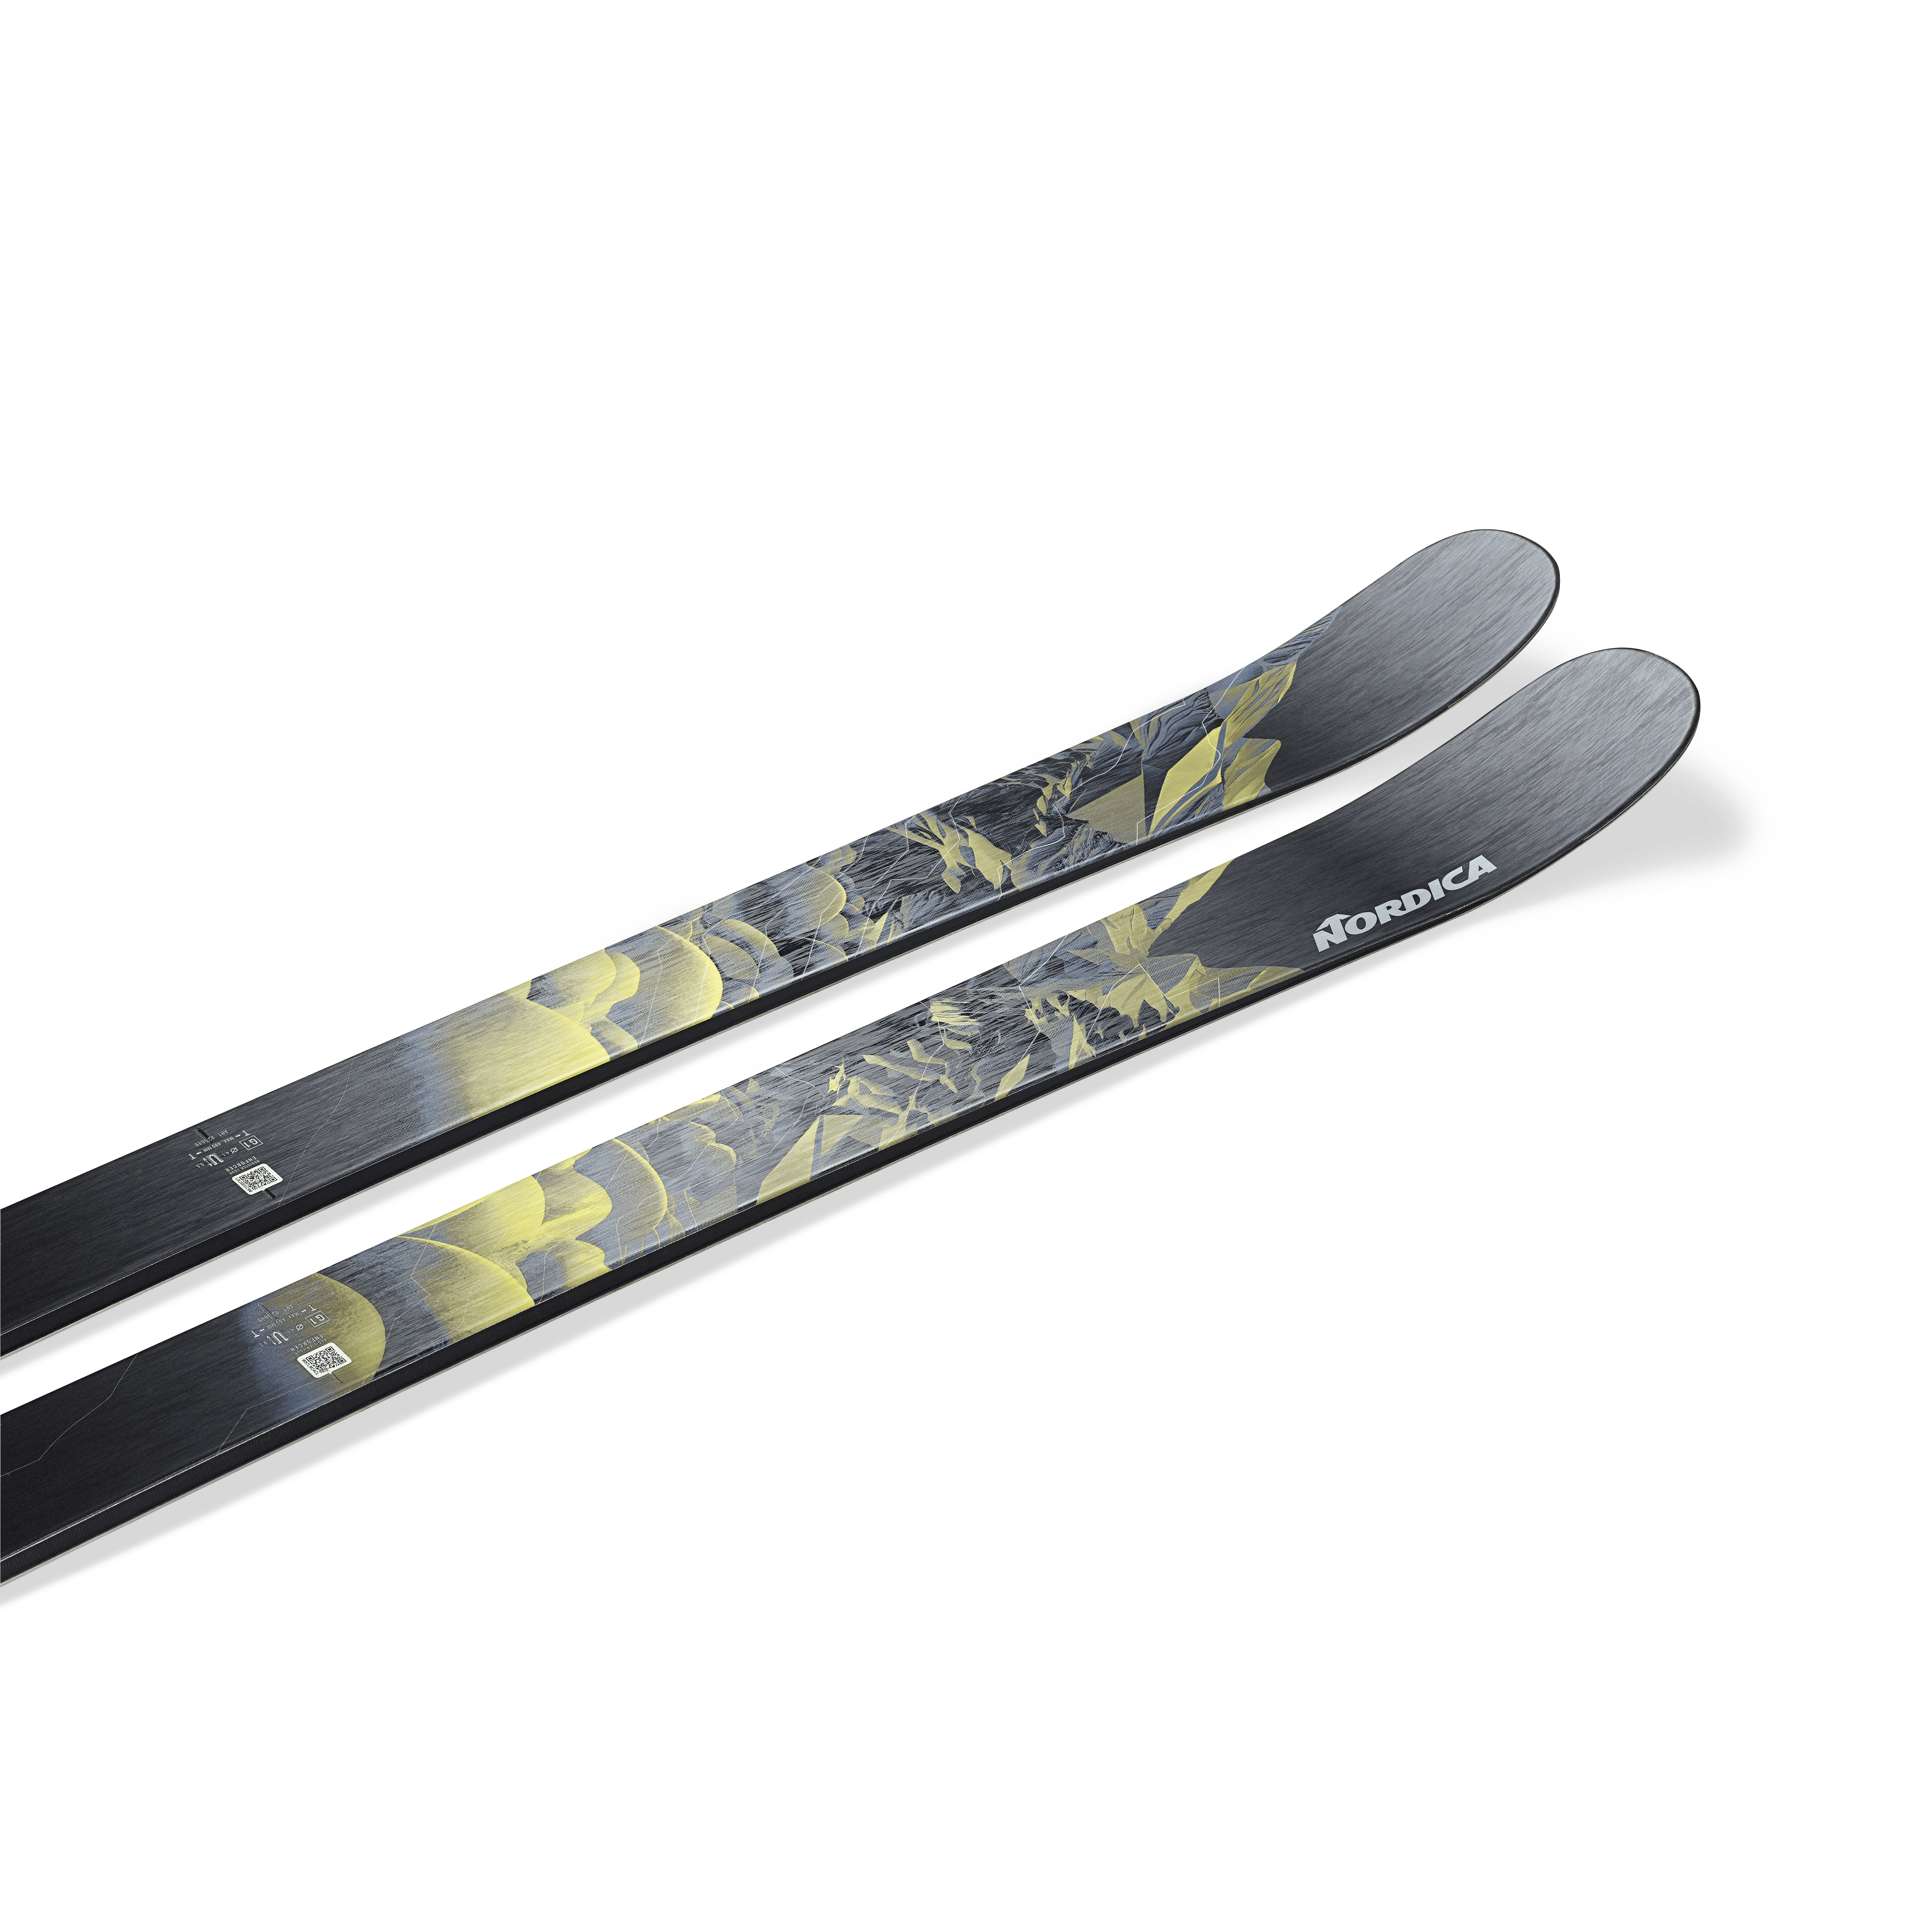 Picture of the Nordica Enforcer 94 skis.